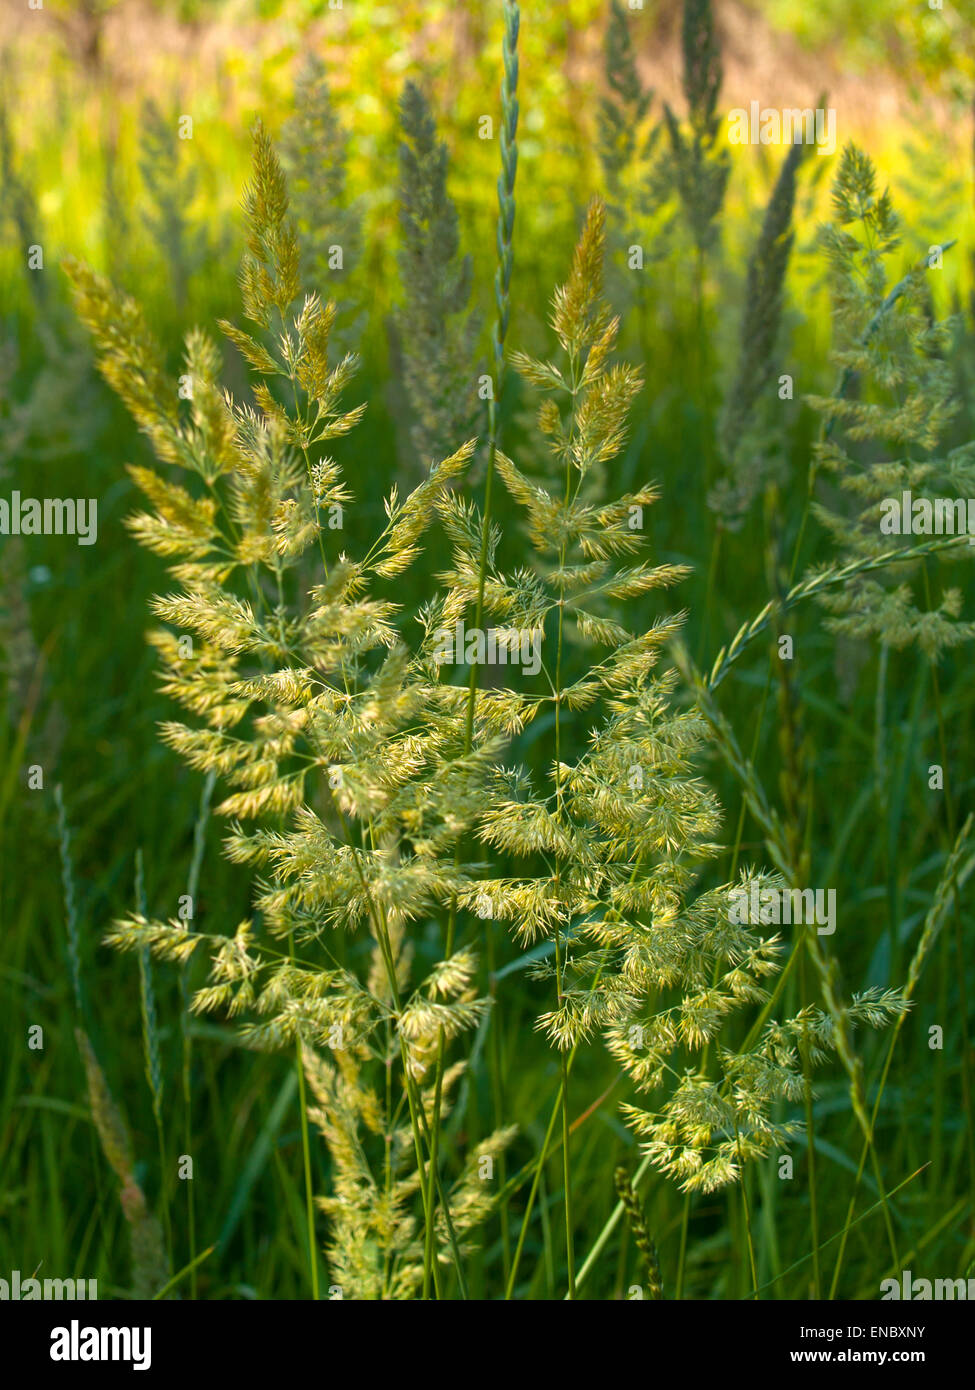 Herbs and grasses(Lolium),(Calamagrostis epgeios) in the meadow. Stock Photo